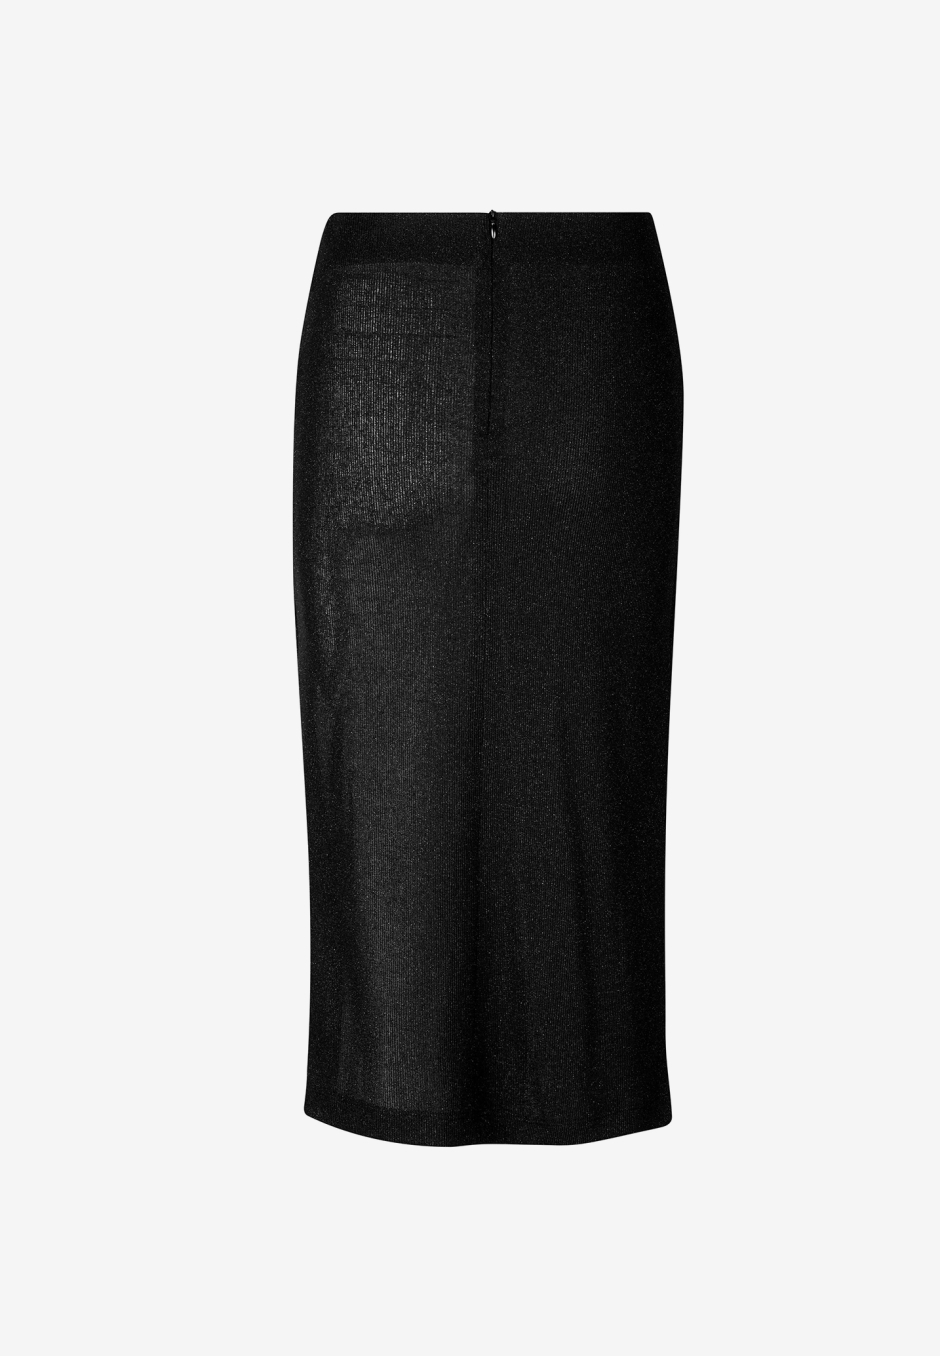 Oval Square Glam Skirt